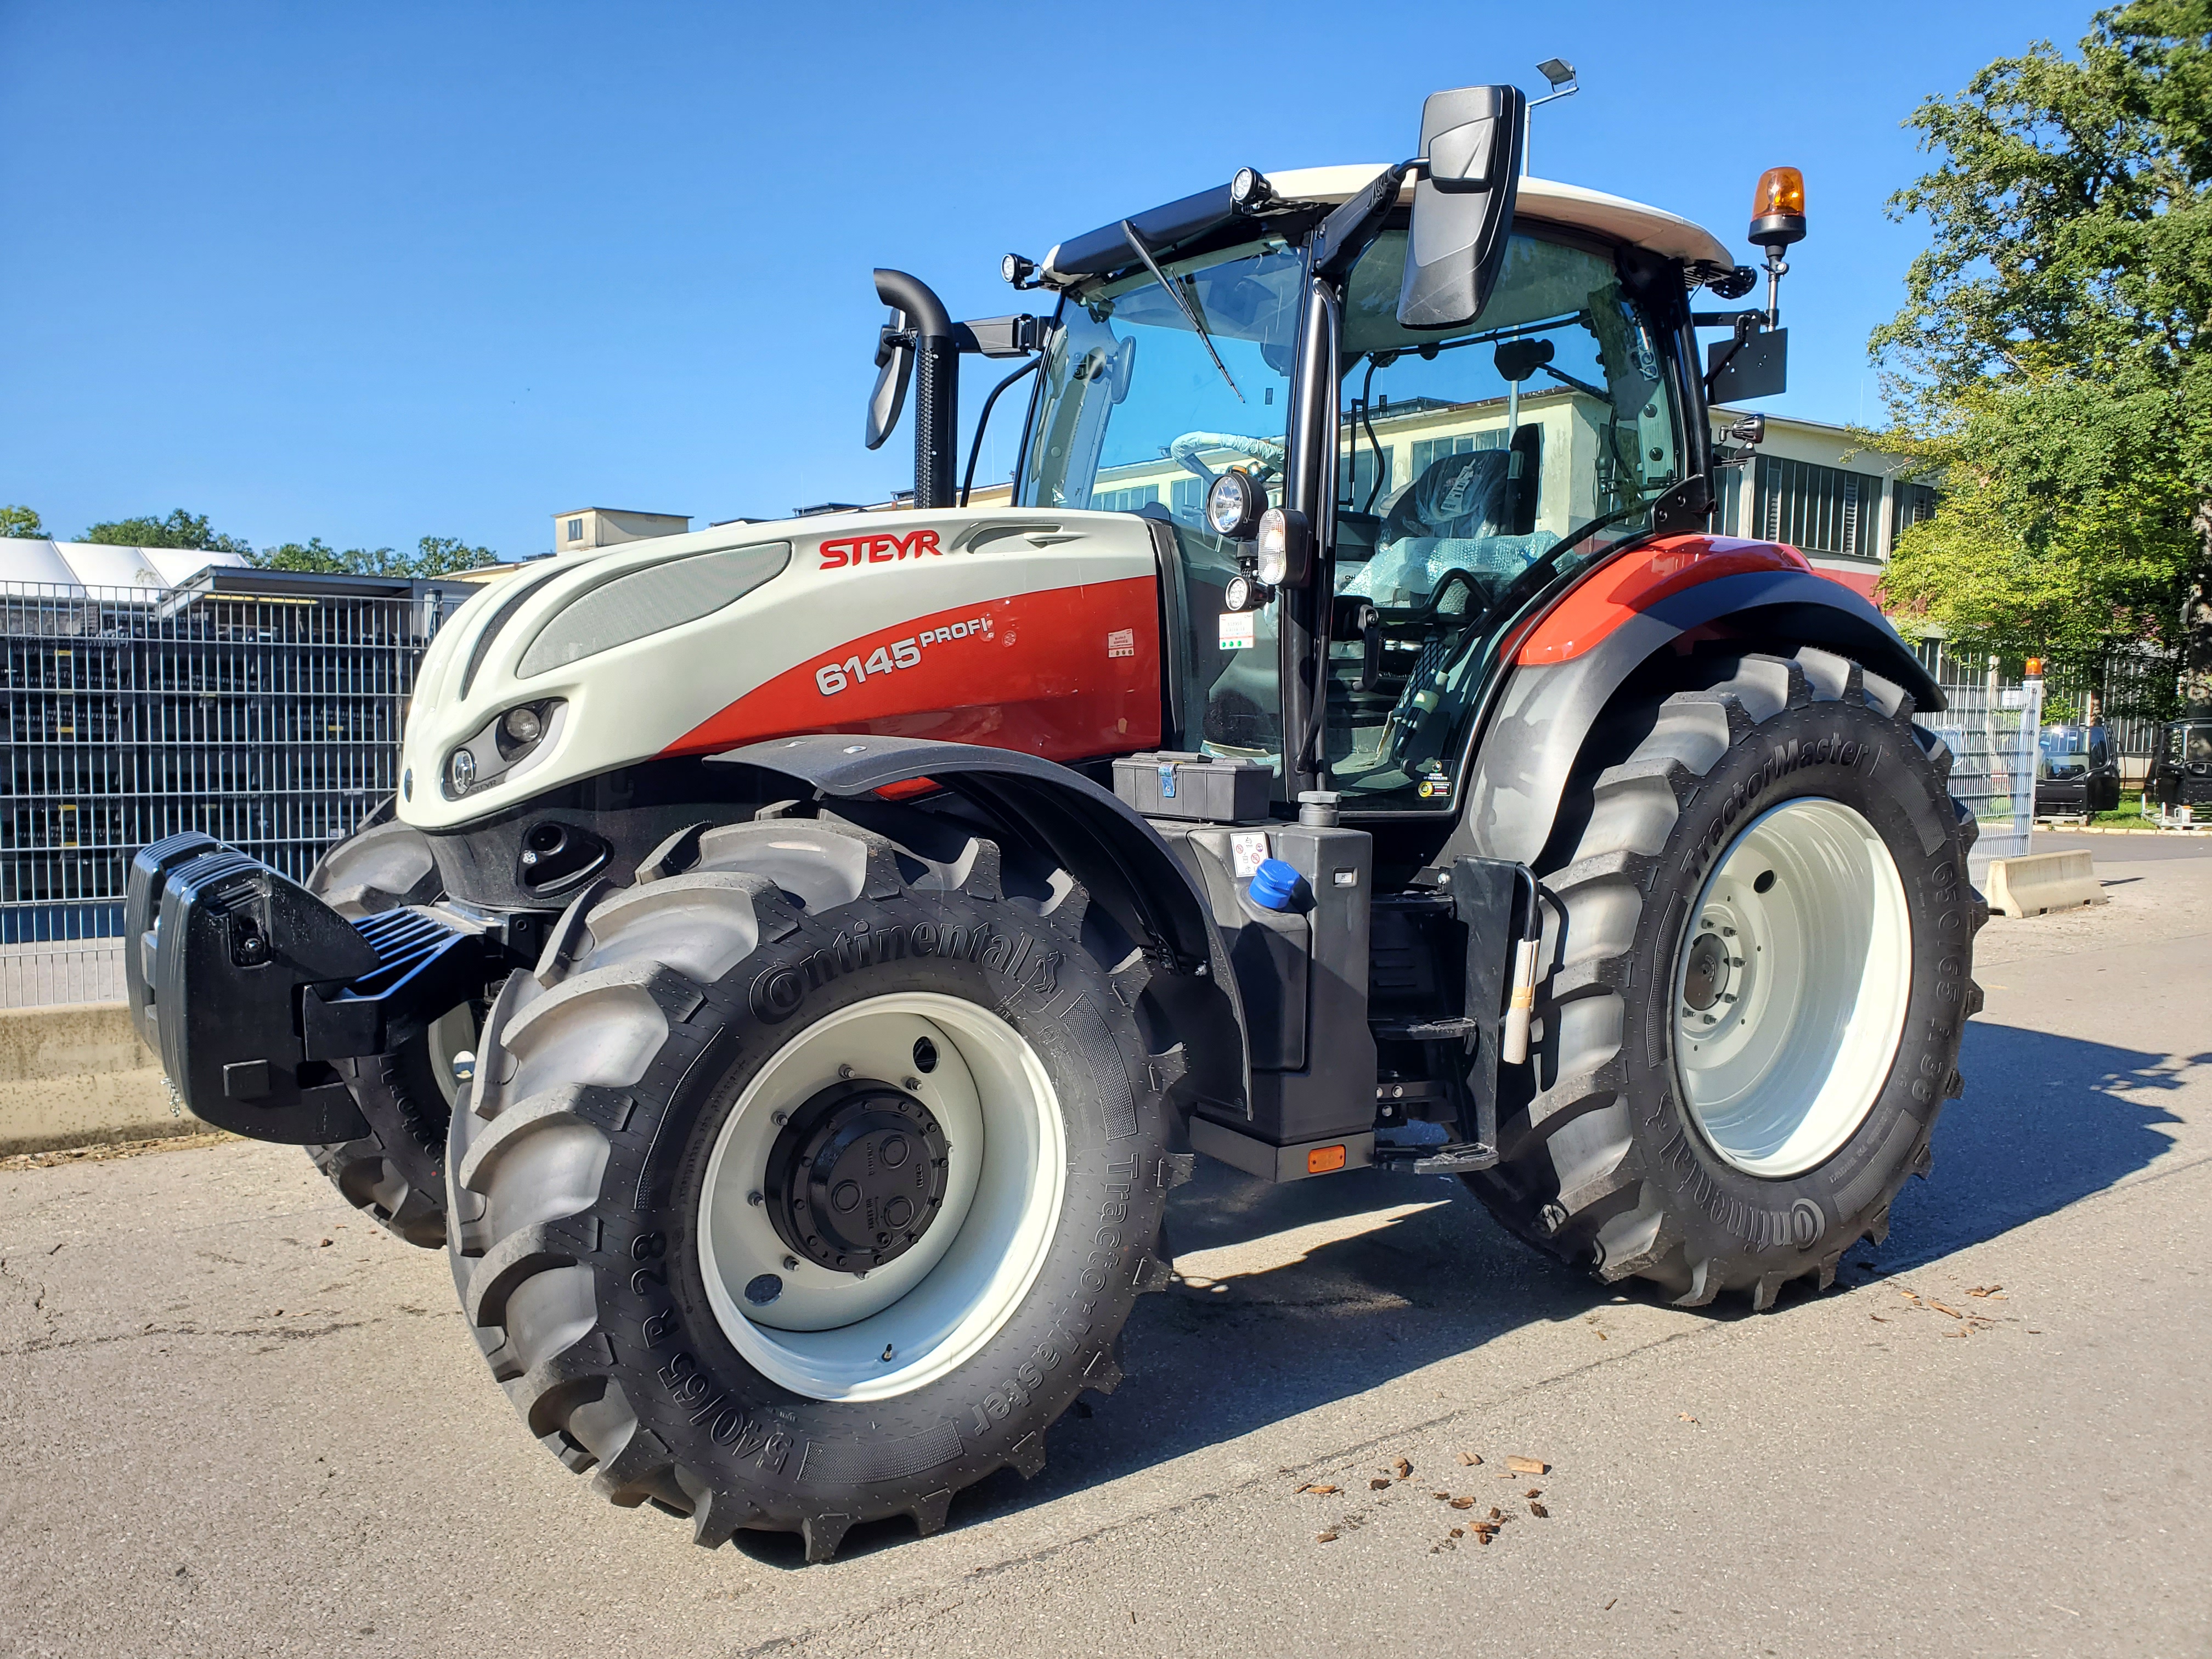 With immediate effect, STEYR tractors are available with VF TractorMaster and TractorMaster.